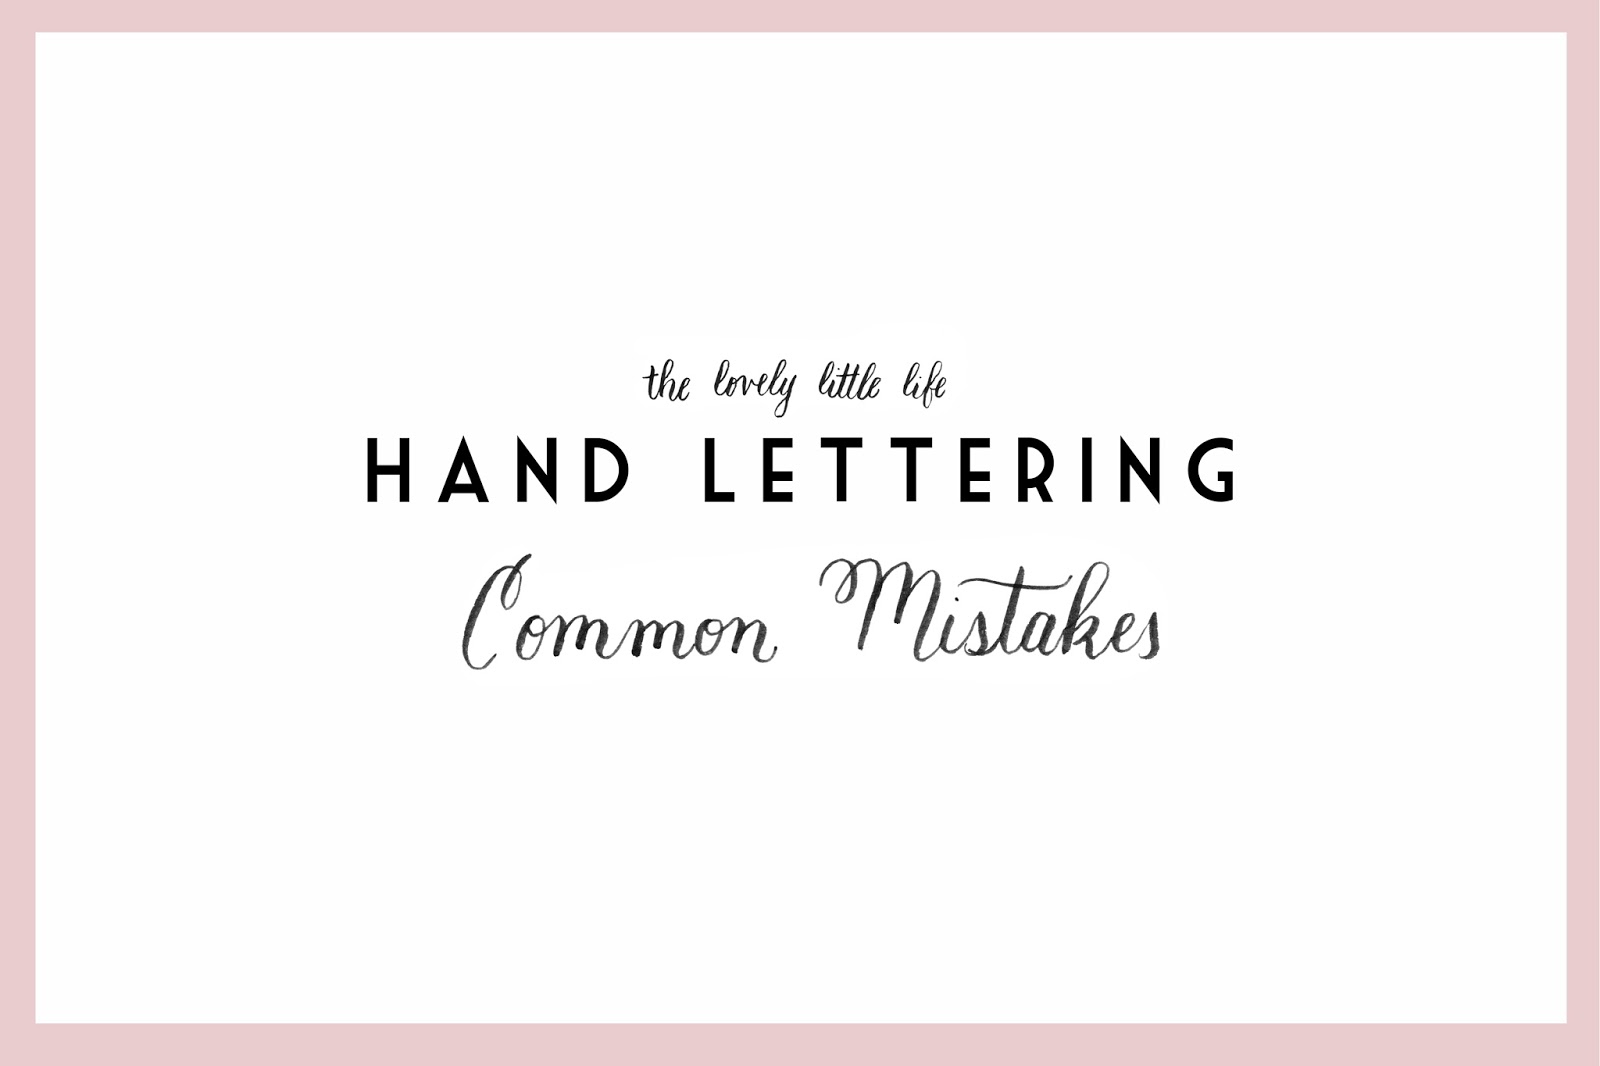 Common Mistakes in Hand Lettering